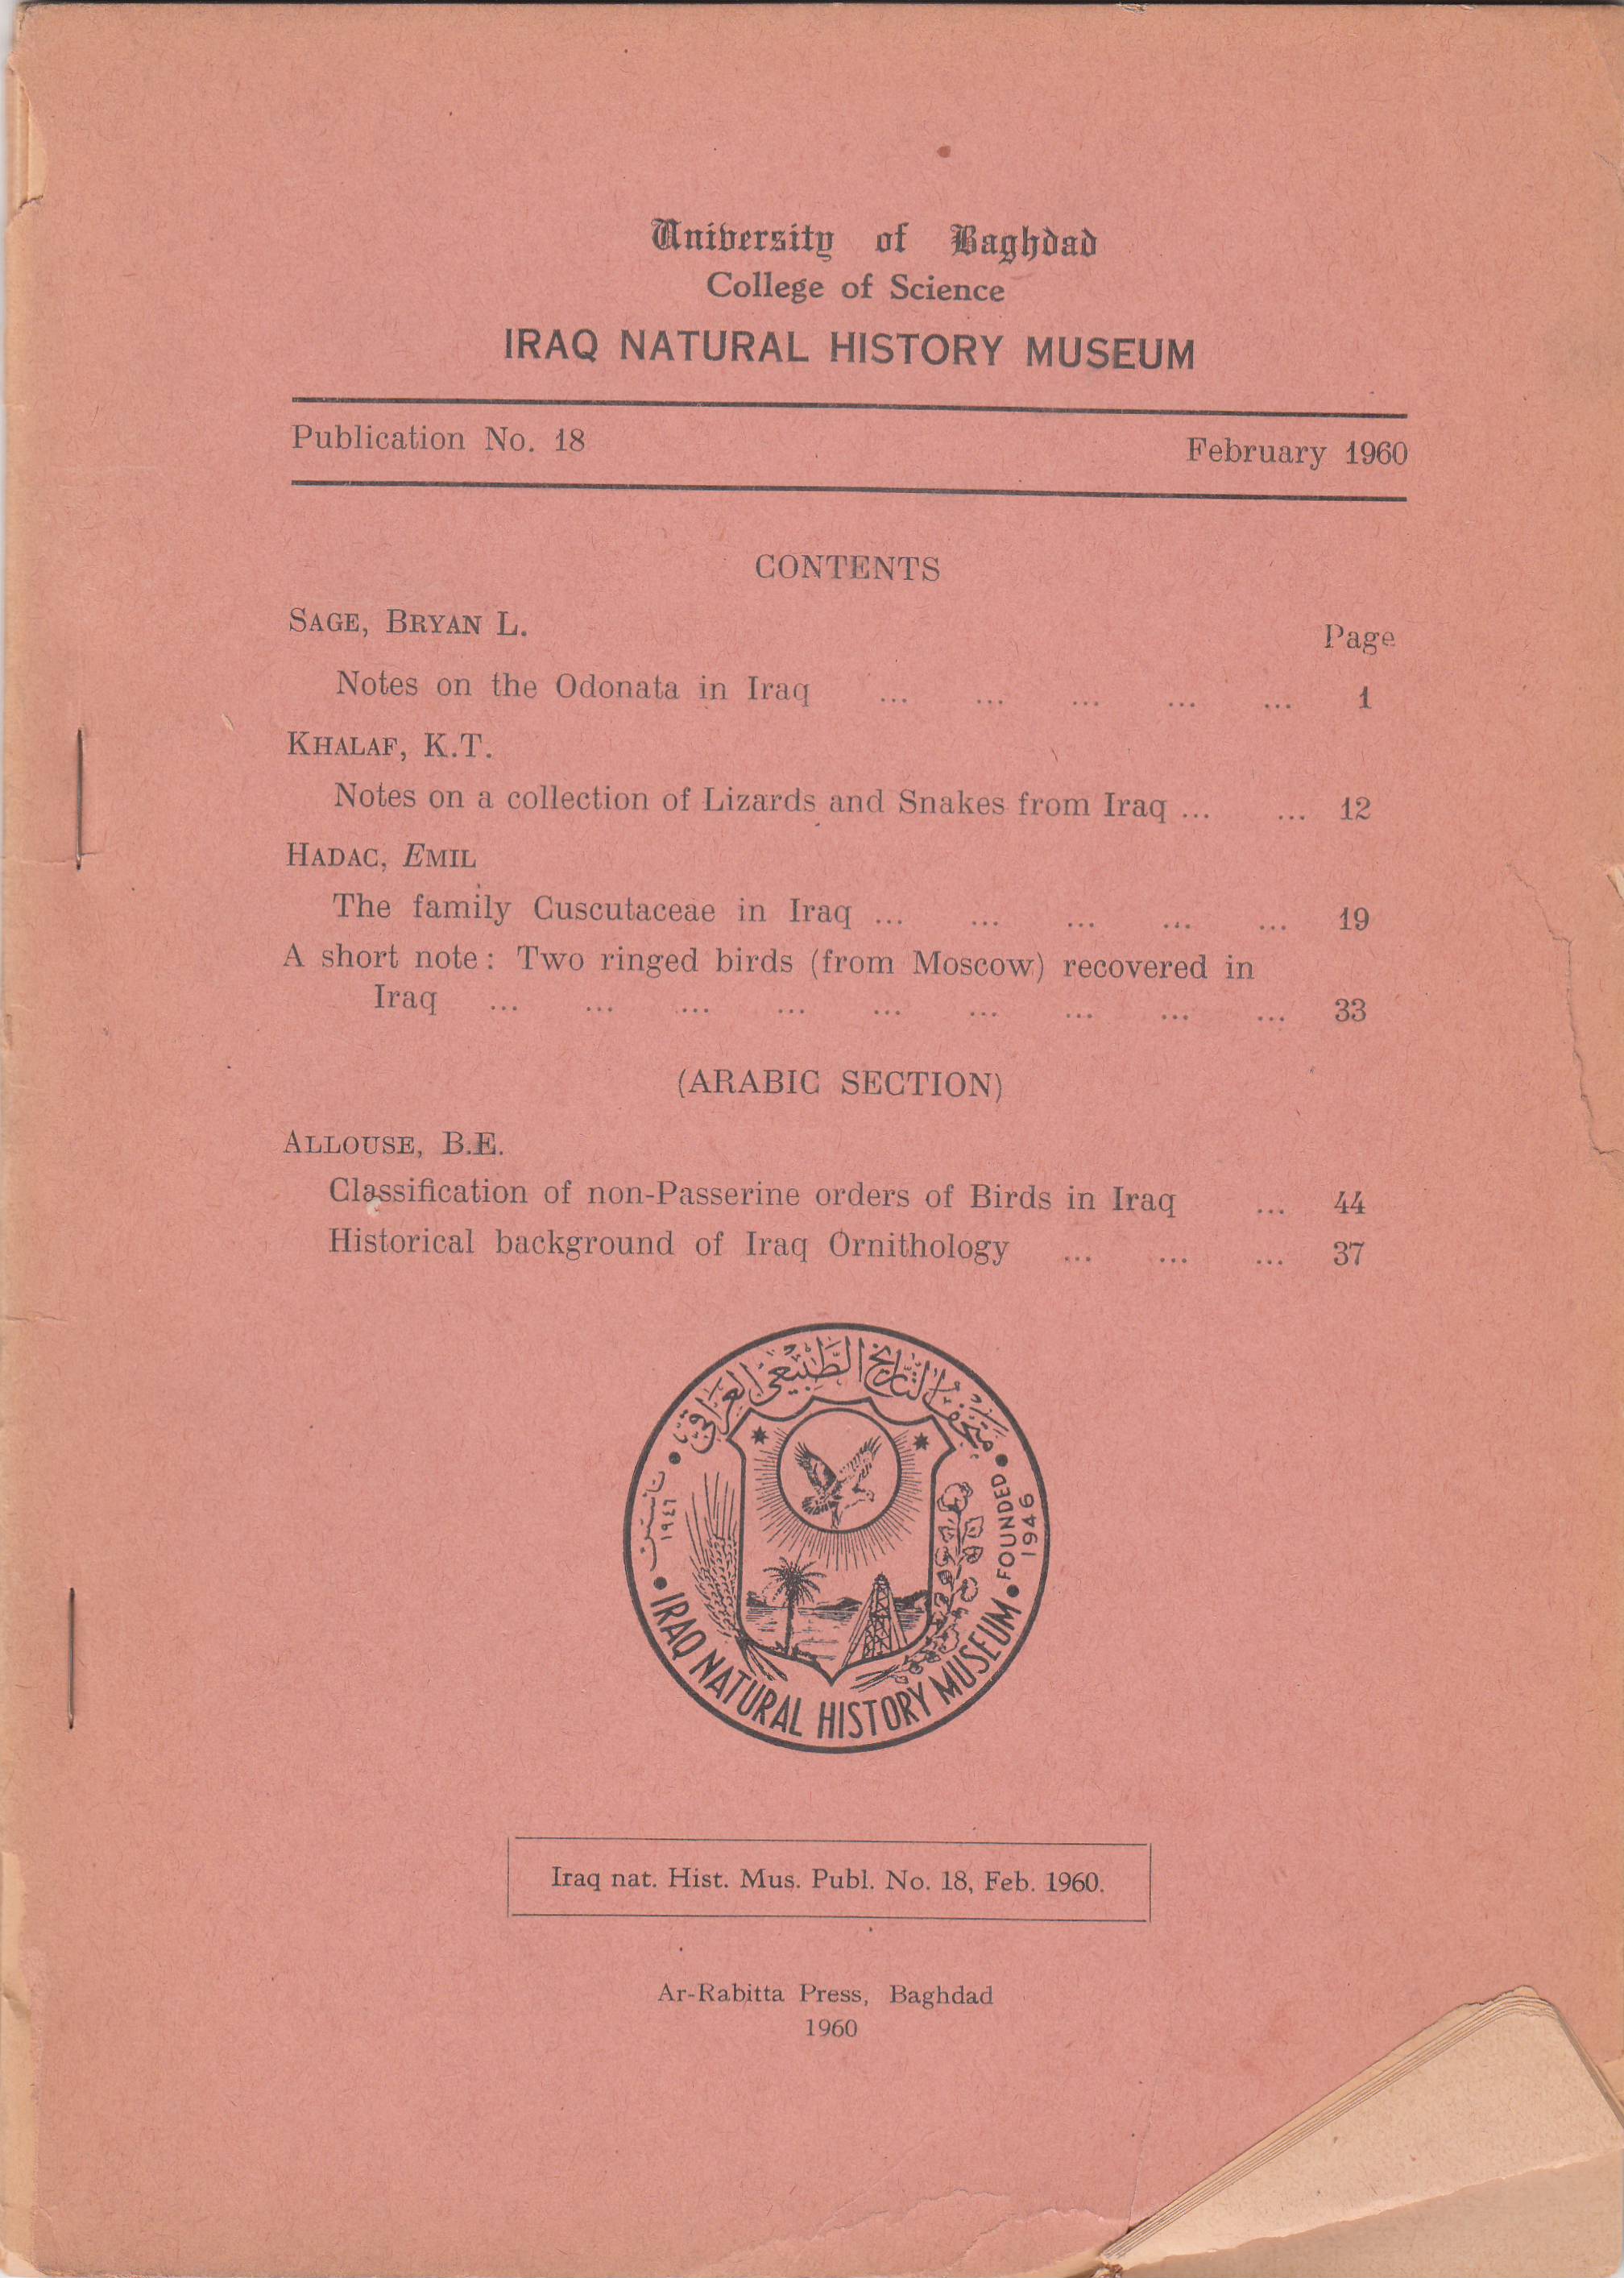 					View No. 18 (1960):  Notes on a collection of Lizards and Snakes from Iraq by KHALAF, K.T. p;12
				